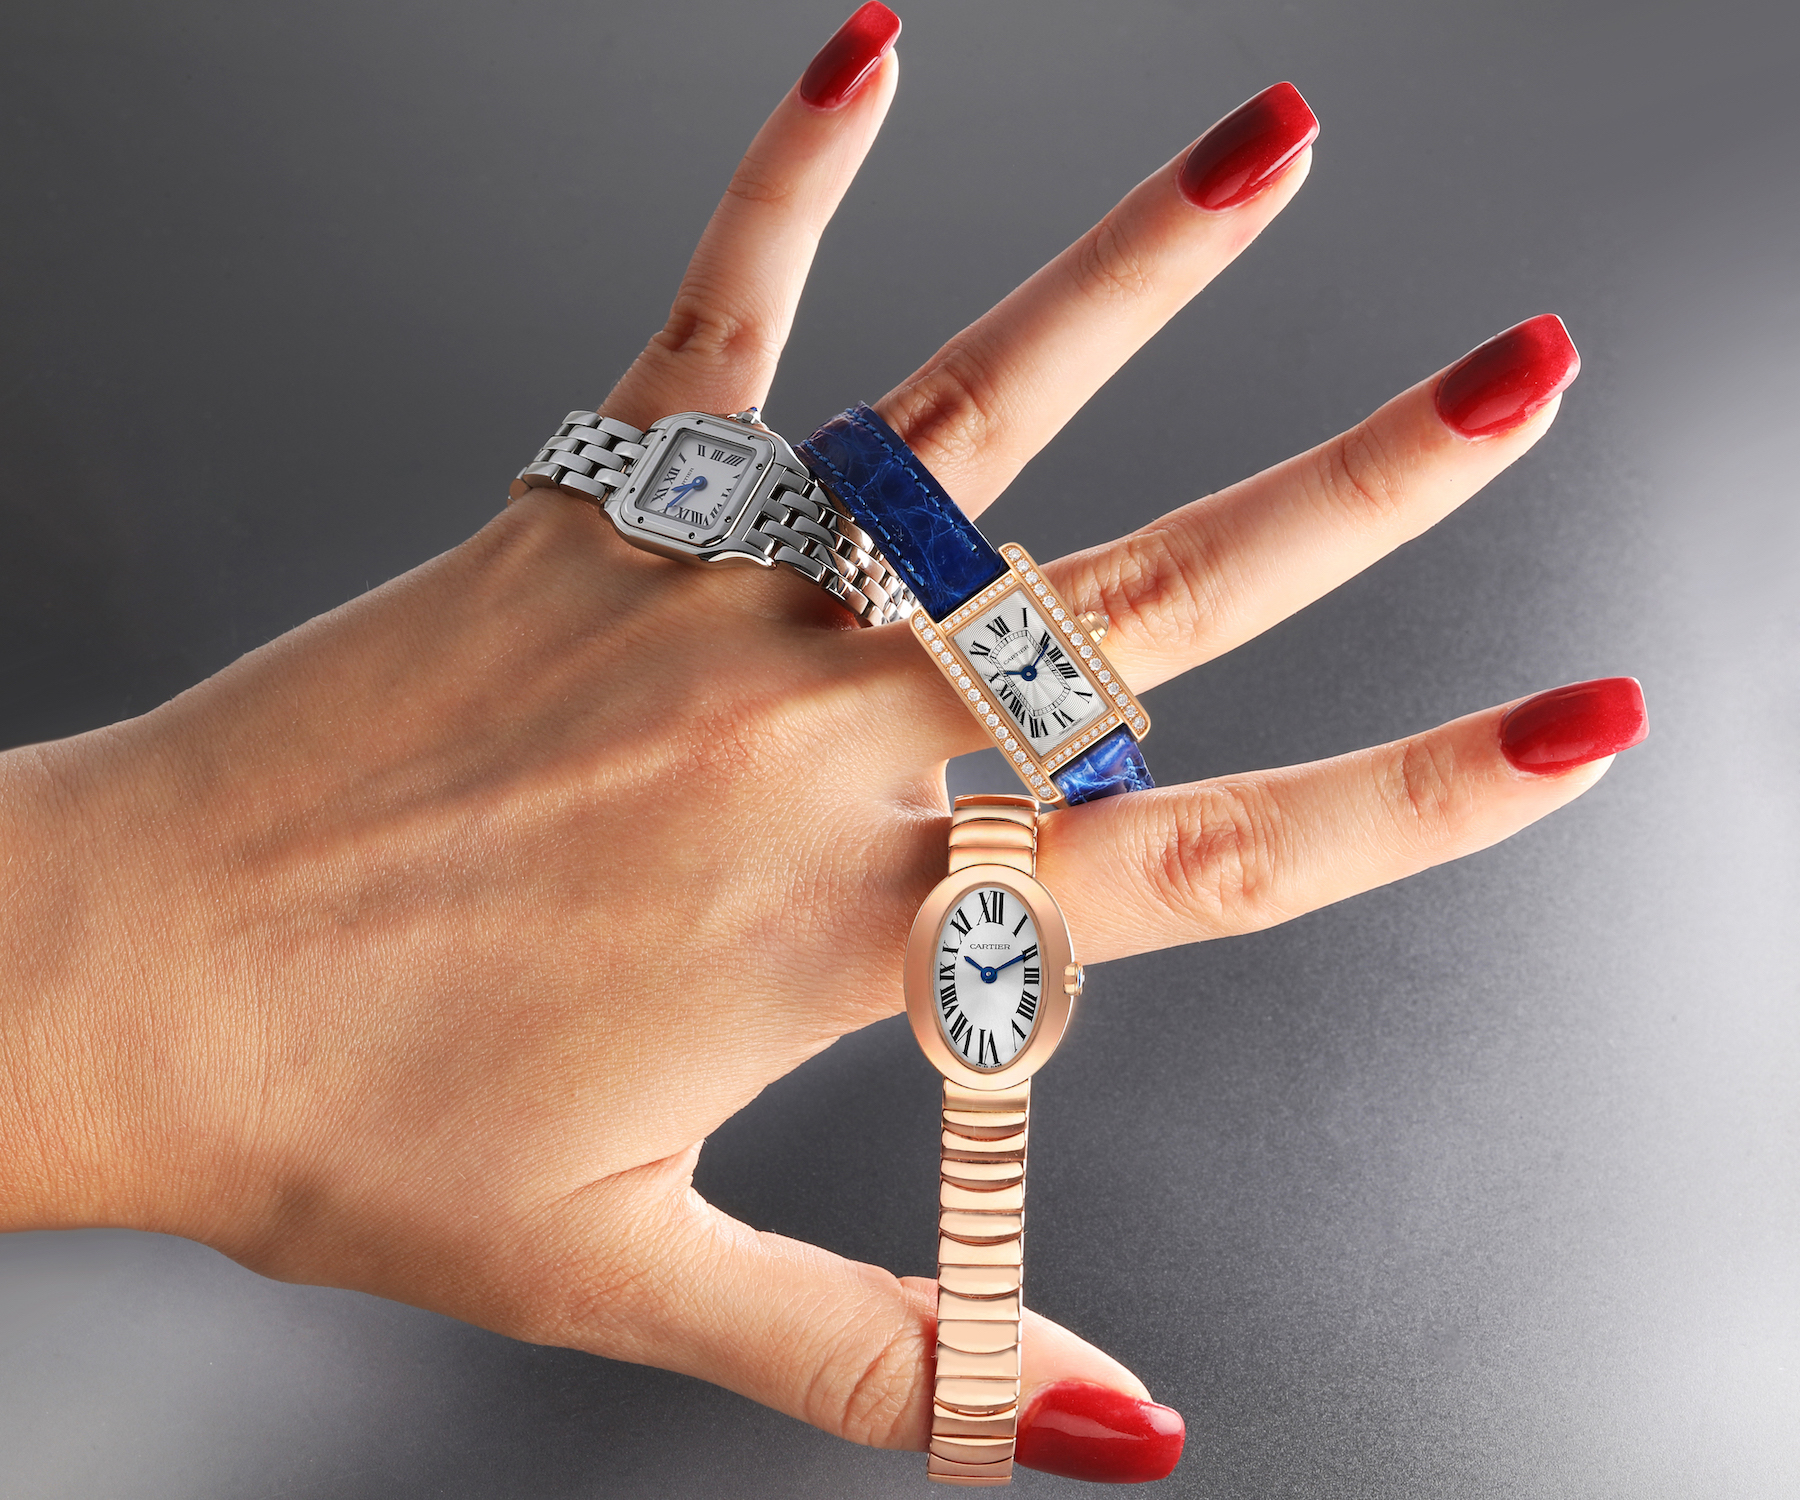 Mini Luxury Watches for Ladies - Cartier Tank Americaine, Baignoire, and Panthere